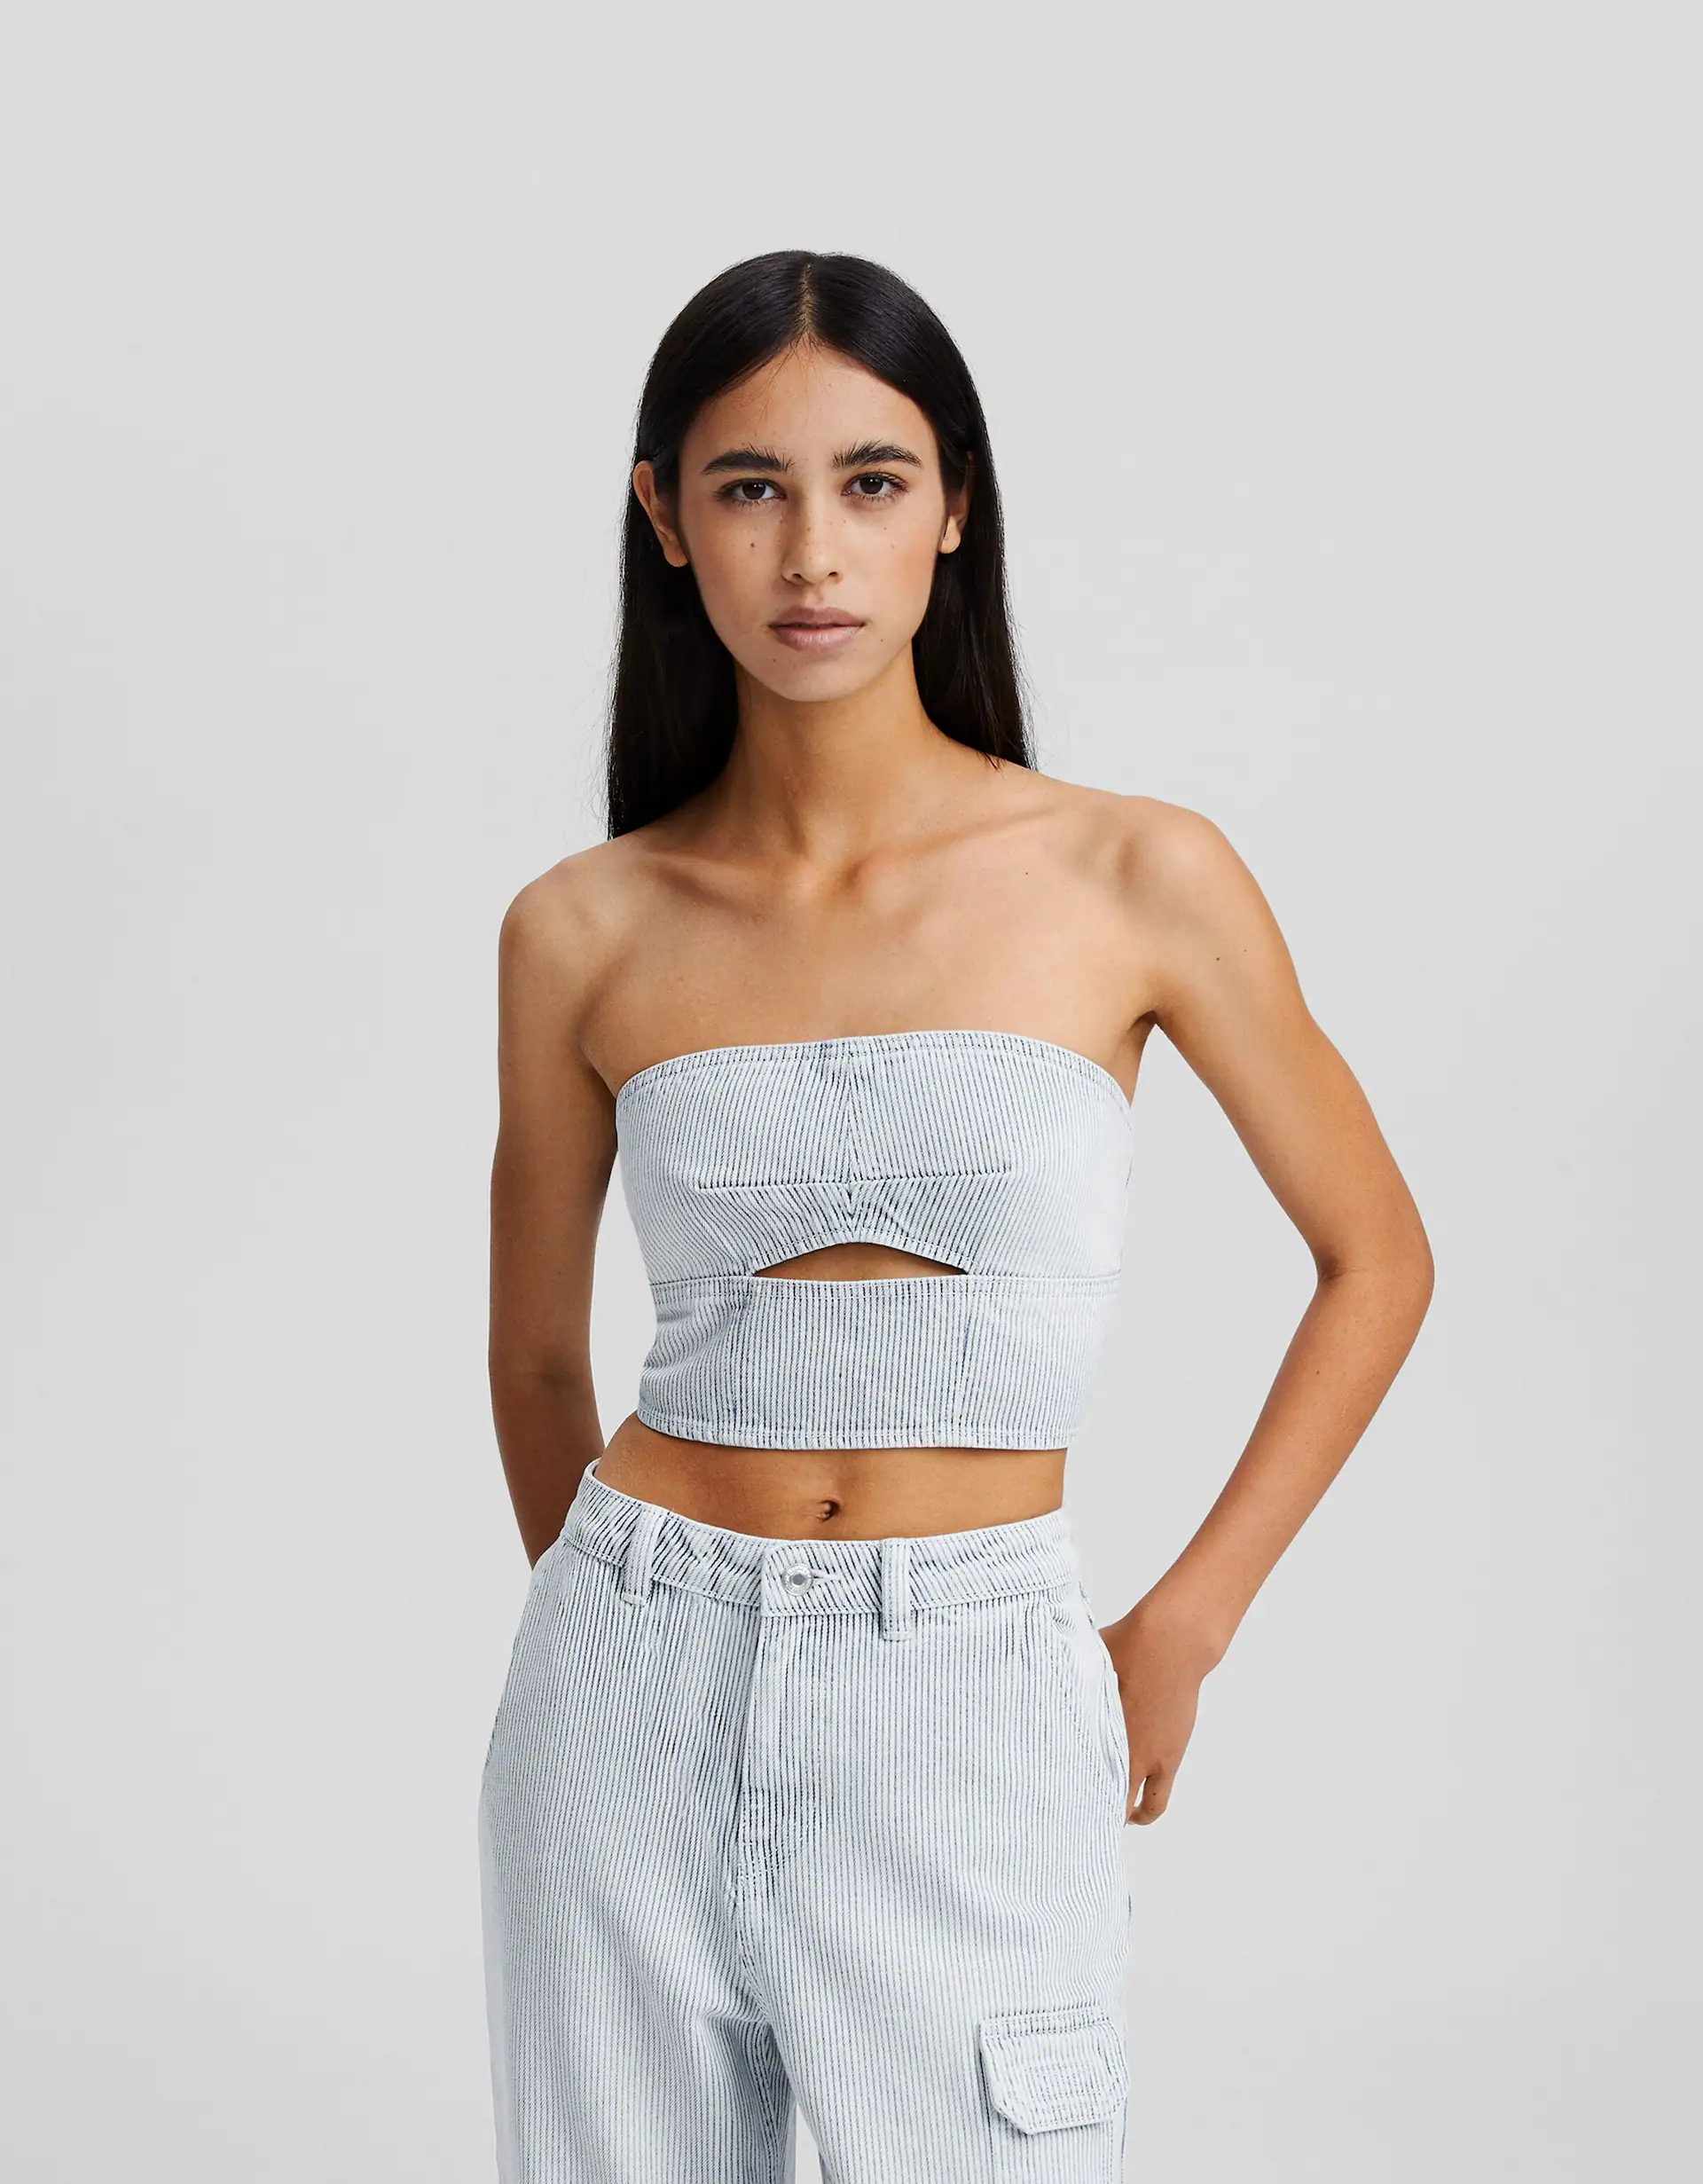 Striped denim bandeau top - Tops and corsets - Women